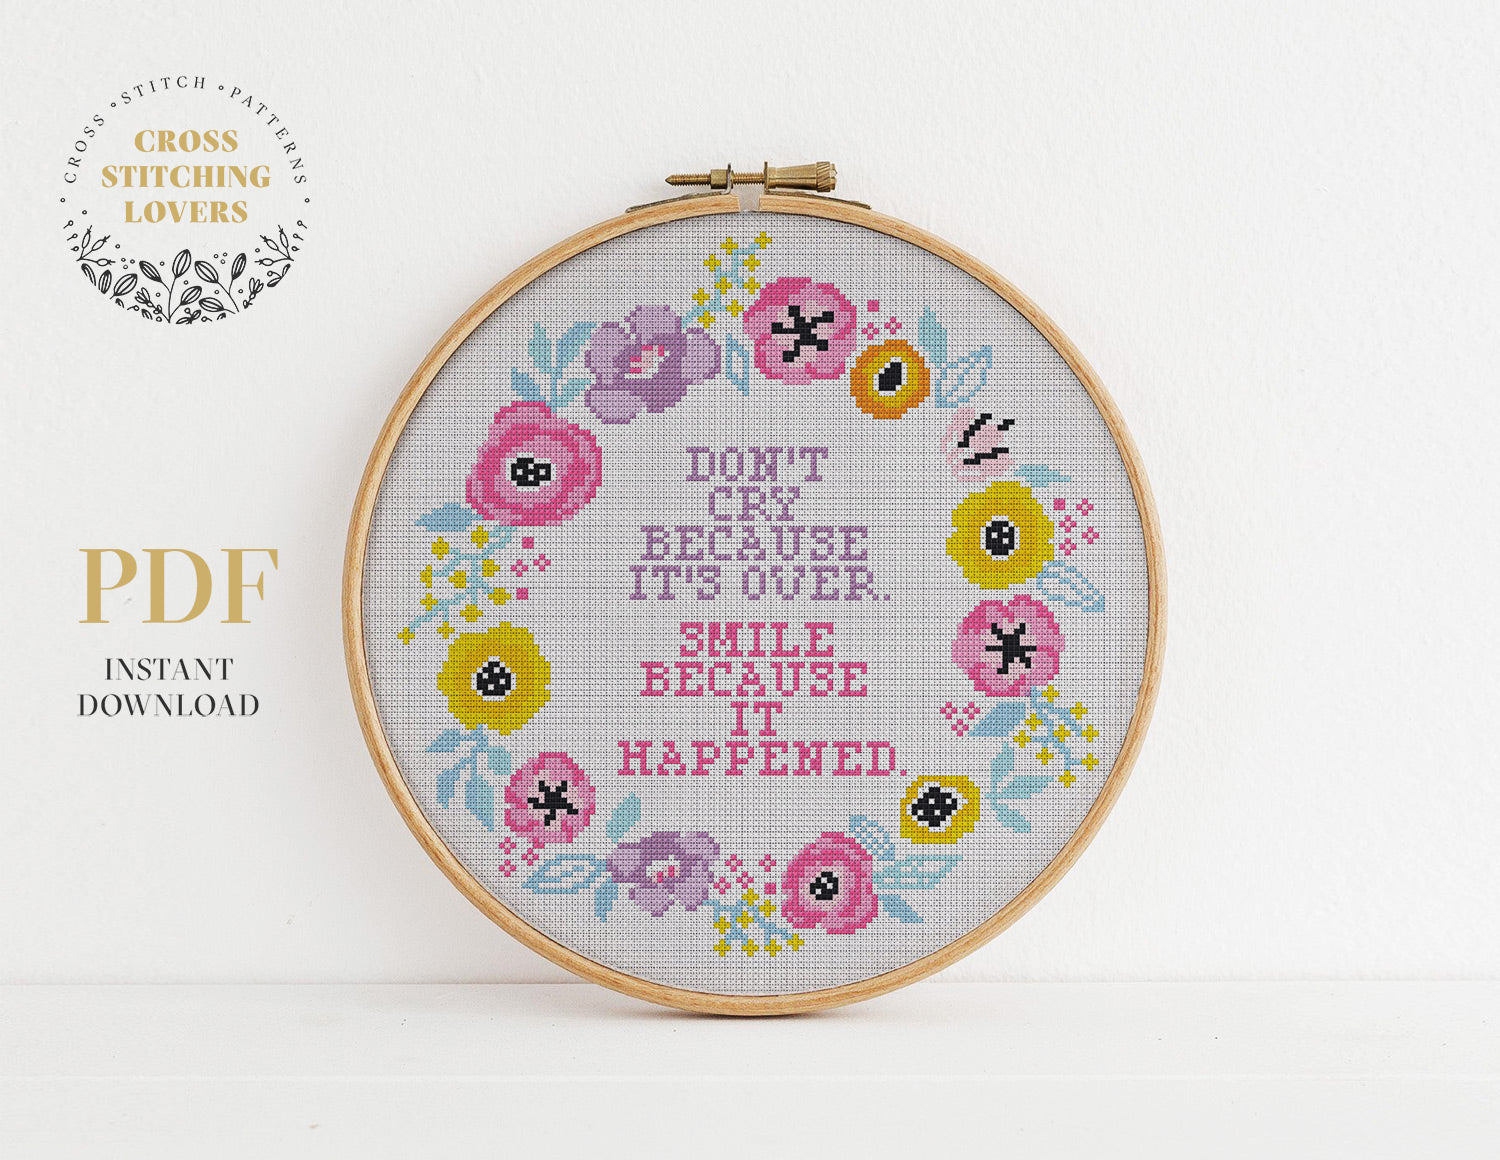 DON'T CRY BECAUSE IT'S OVER - Cross stitch pattern